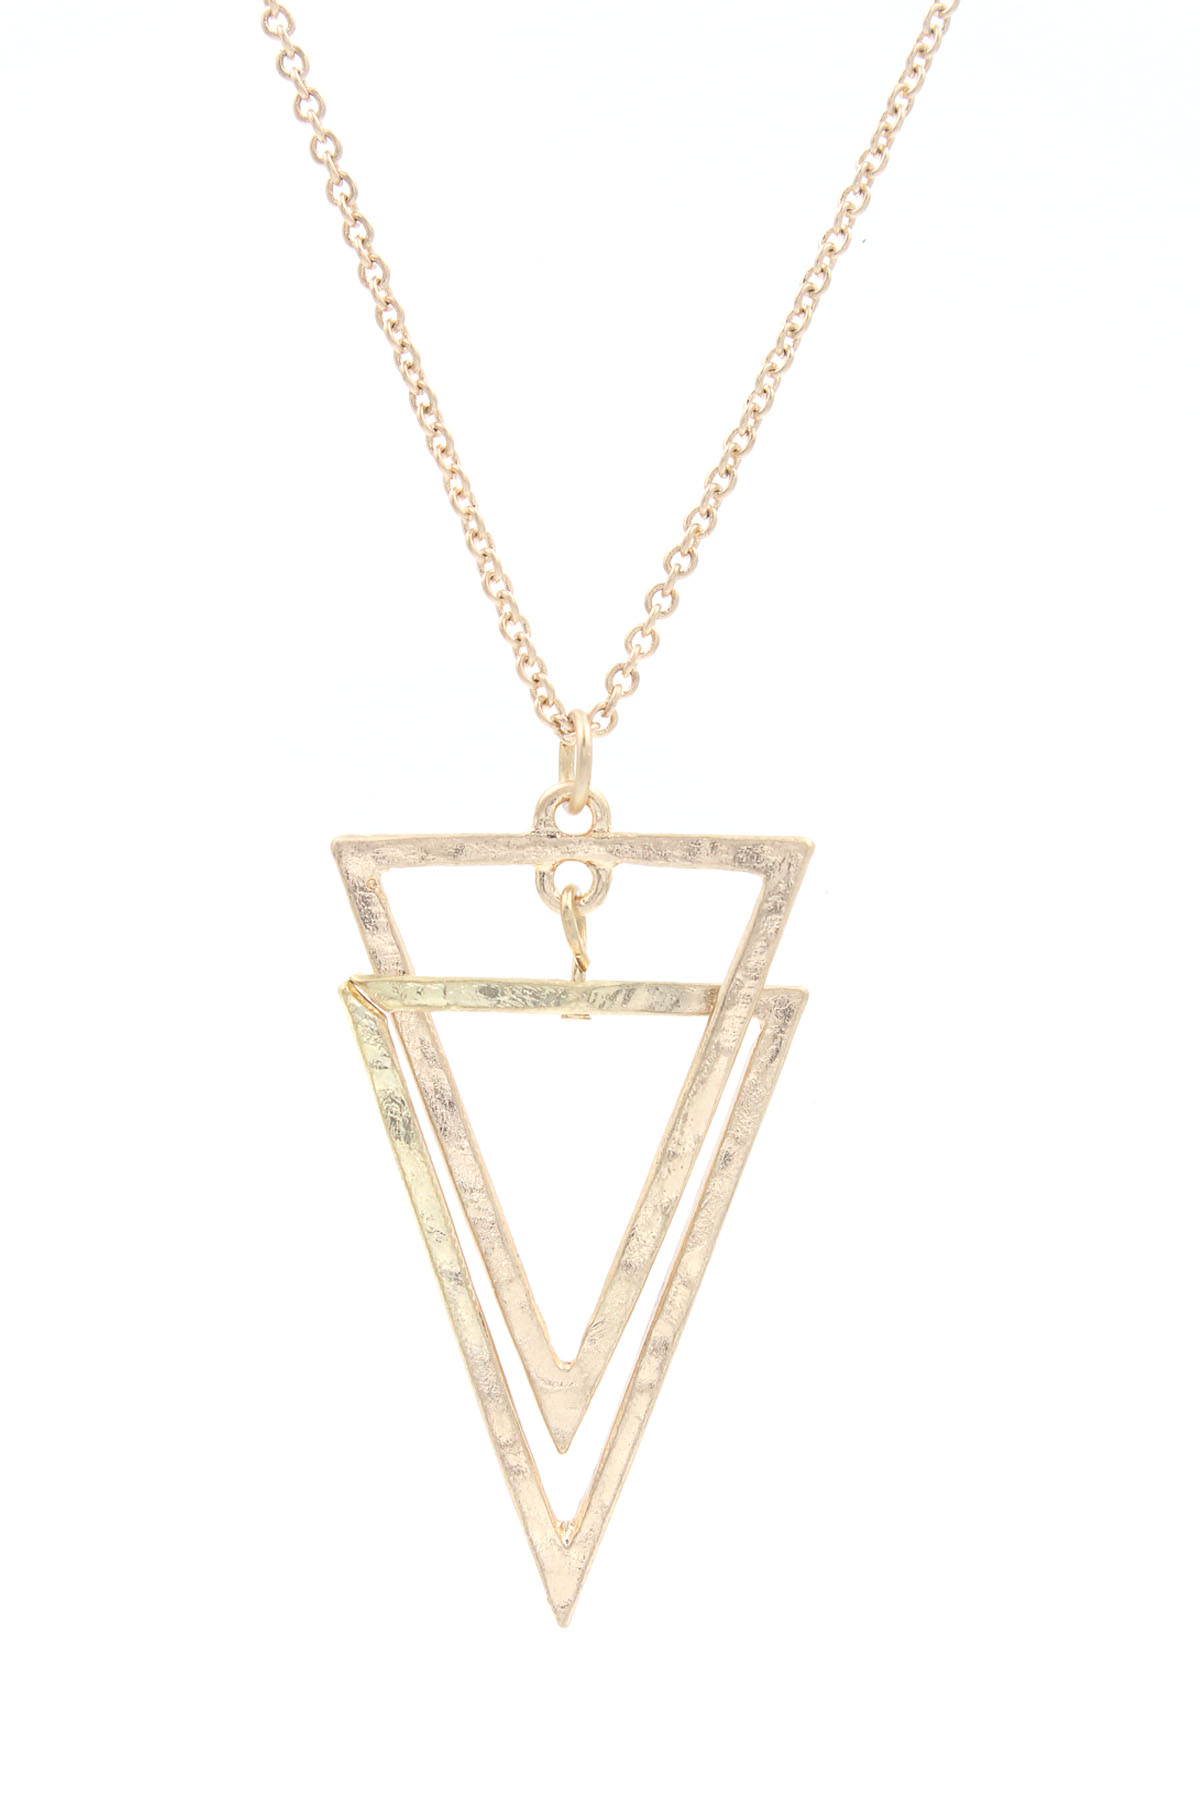 Interlinked Triangle Pendant Necklace - Necklaces